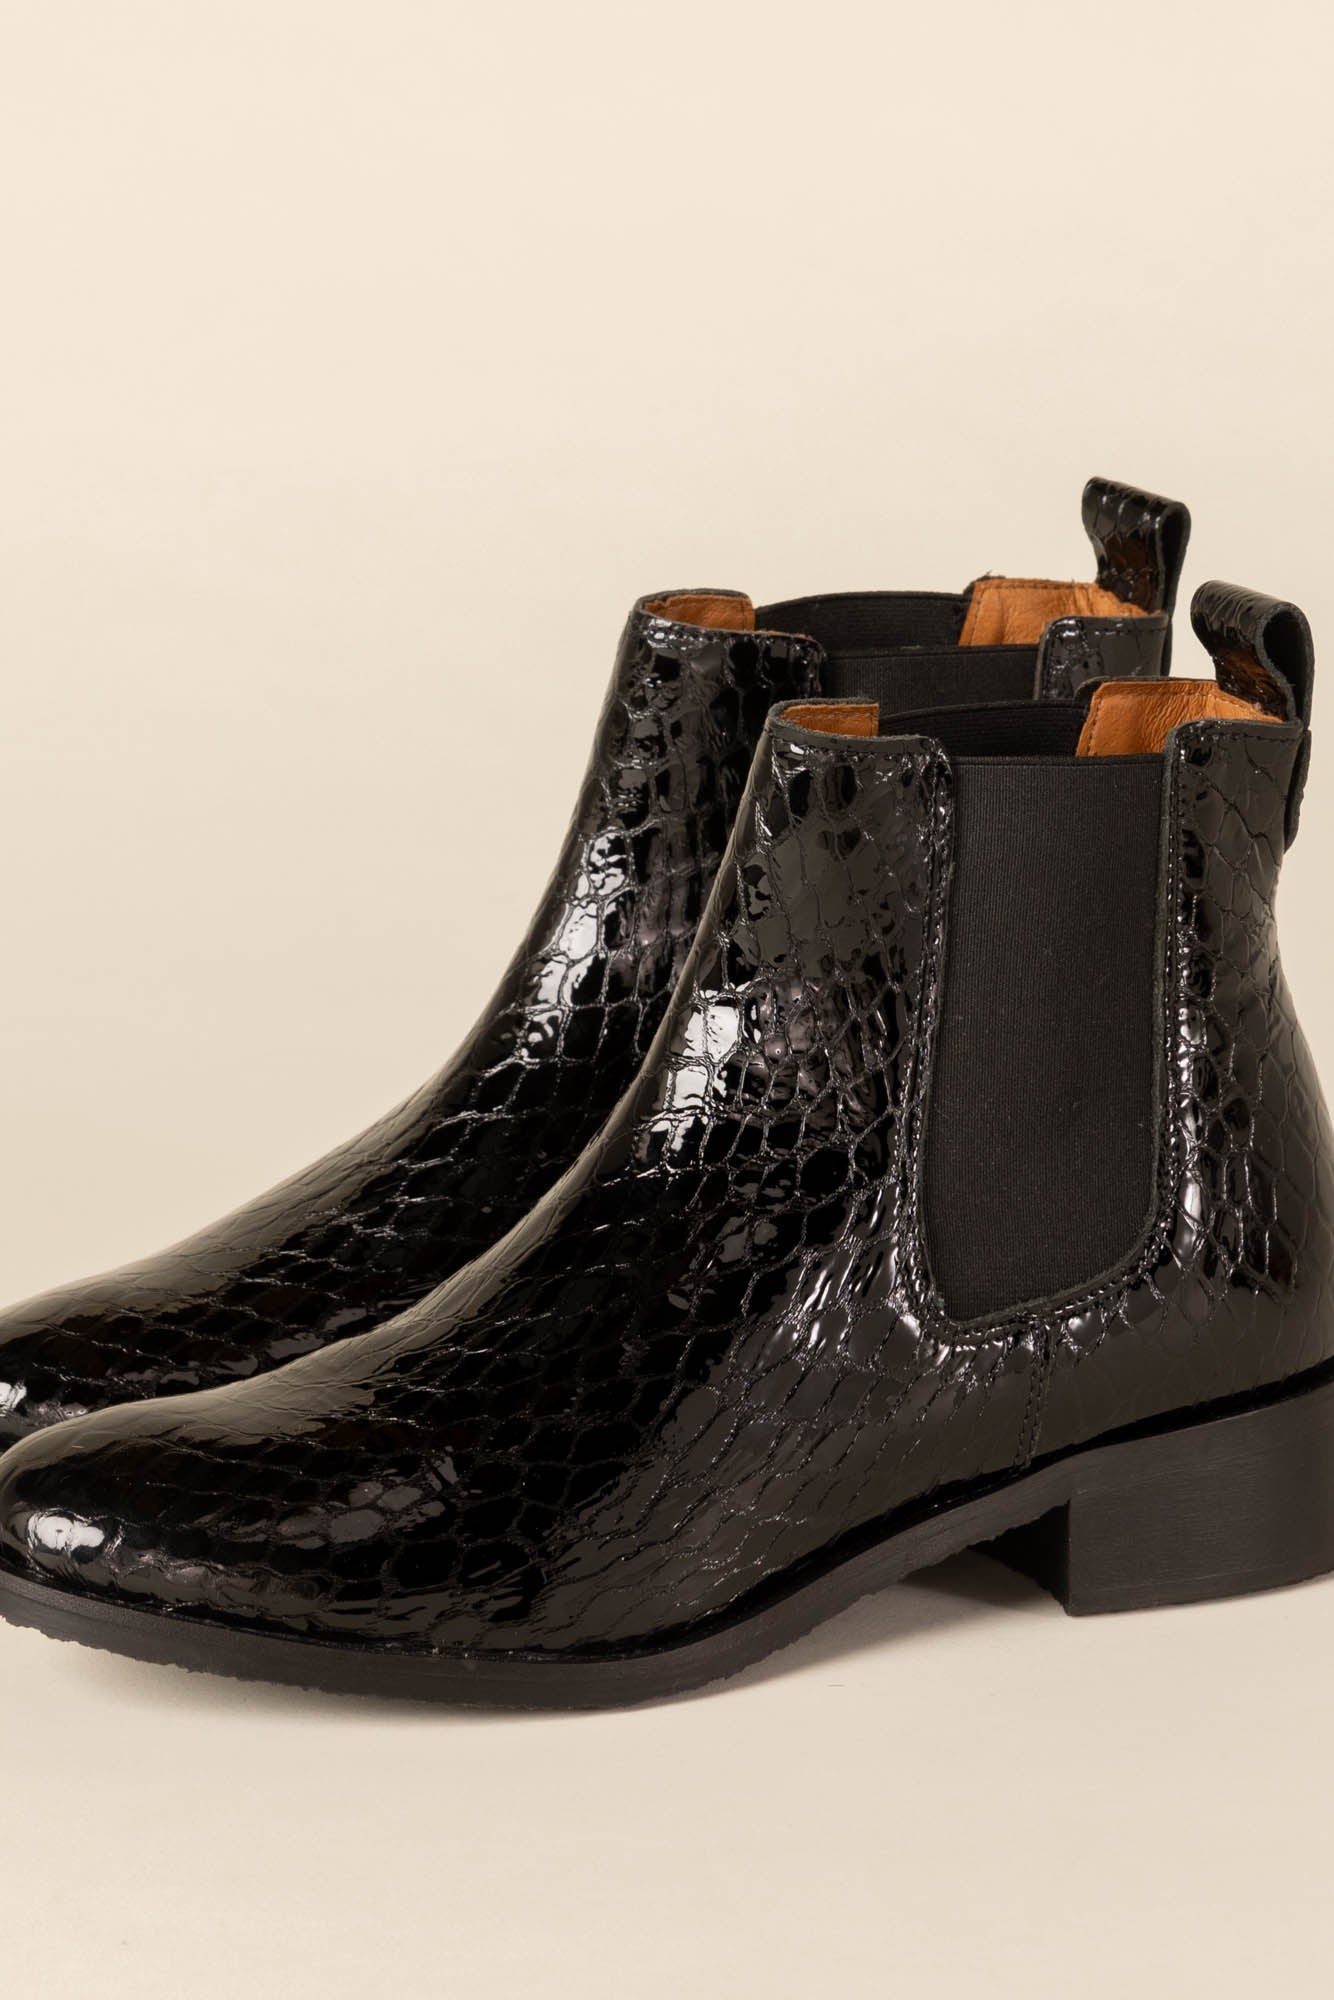 Josepha black embossed patent leather ankle boots